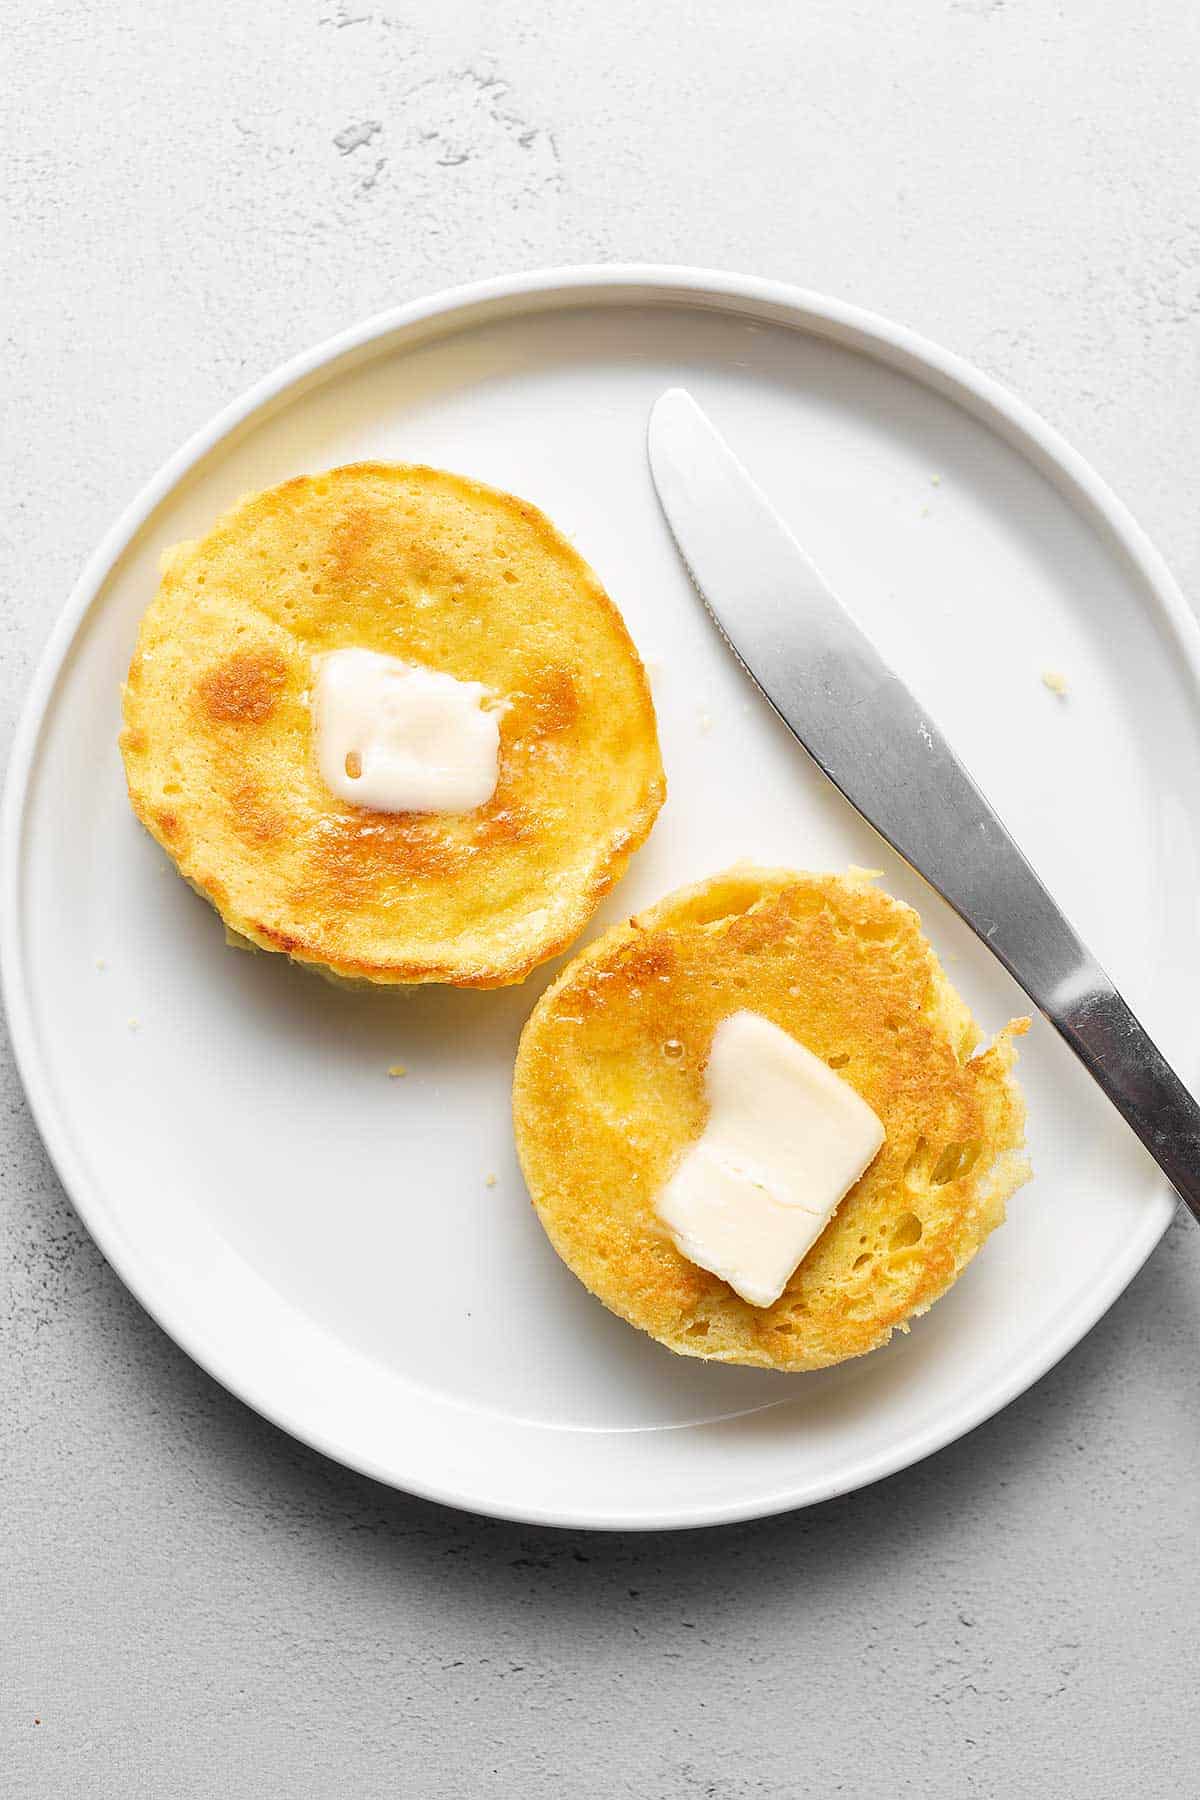 keto English muffins on a white plate with butter and a knife